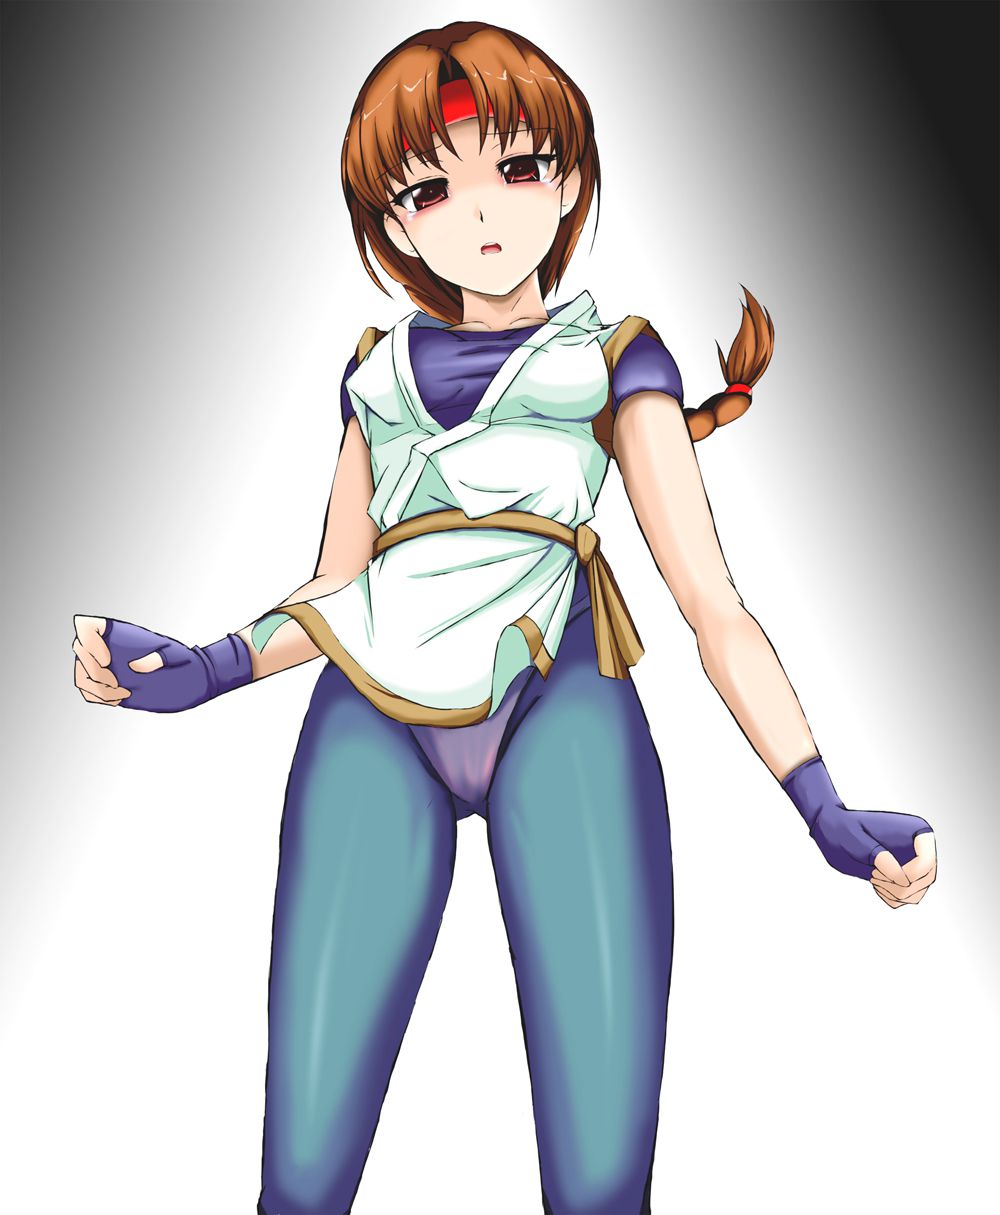 [Indian_To_the_right] Strip KO! And after that... (King of Fighters) [Indian_To_the_right] 脱衣KO!その後は… 106